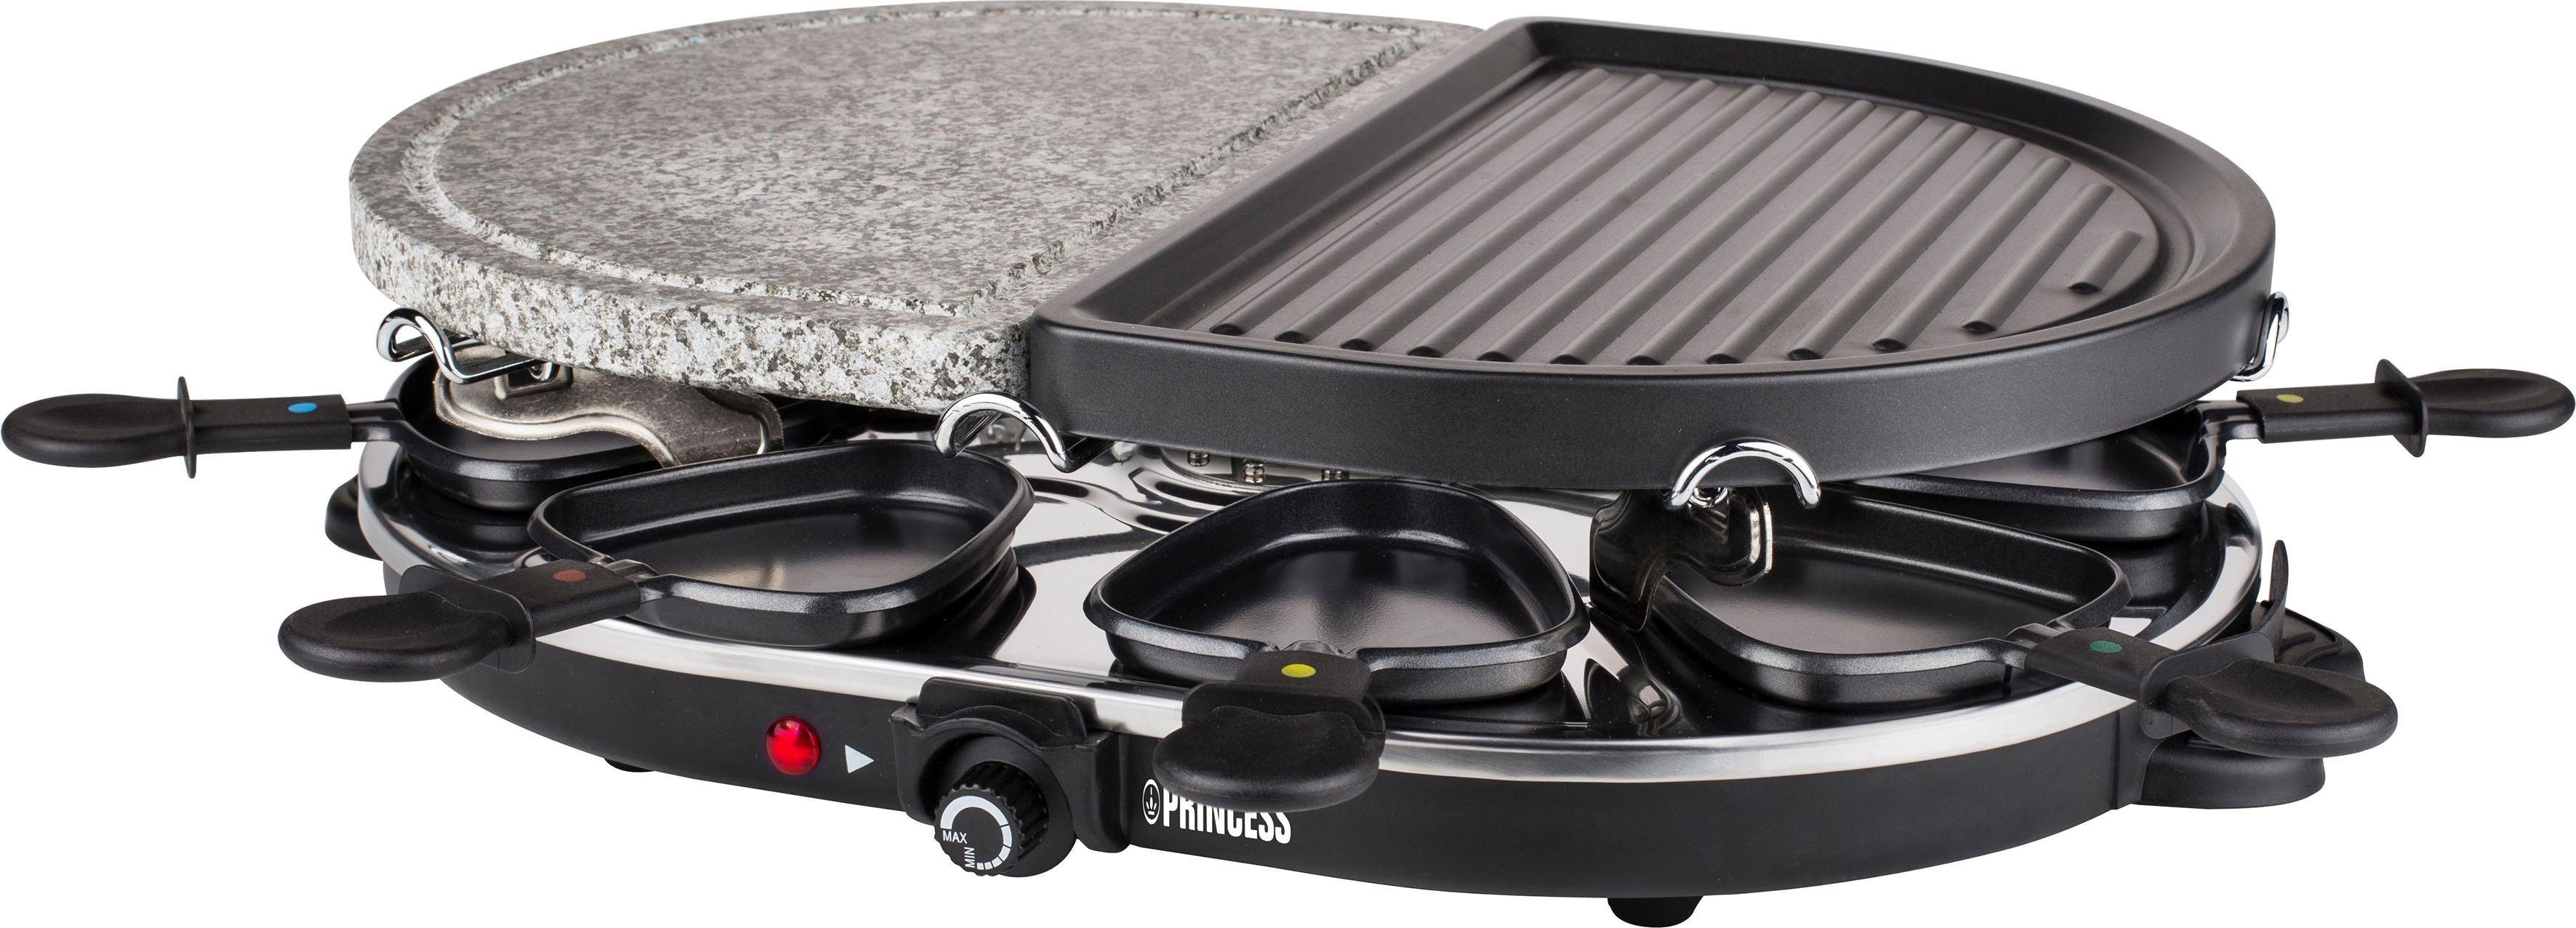 1200 W & 162710, Stone - 8 PRINCESS Raclettepfännchen, Grill Oval Party 8 Raclette